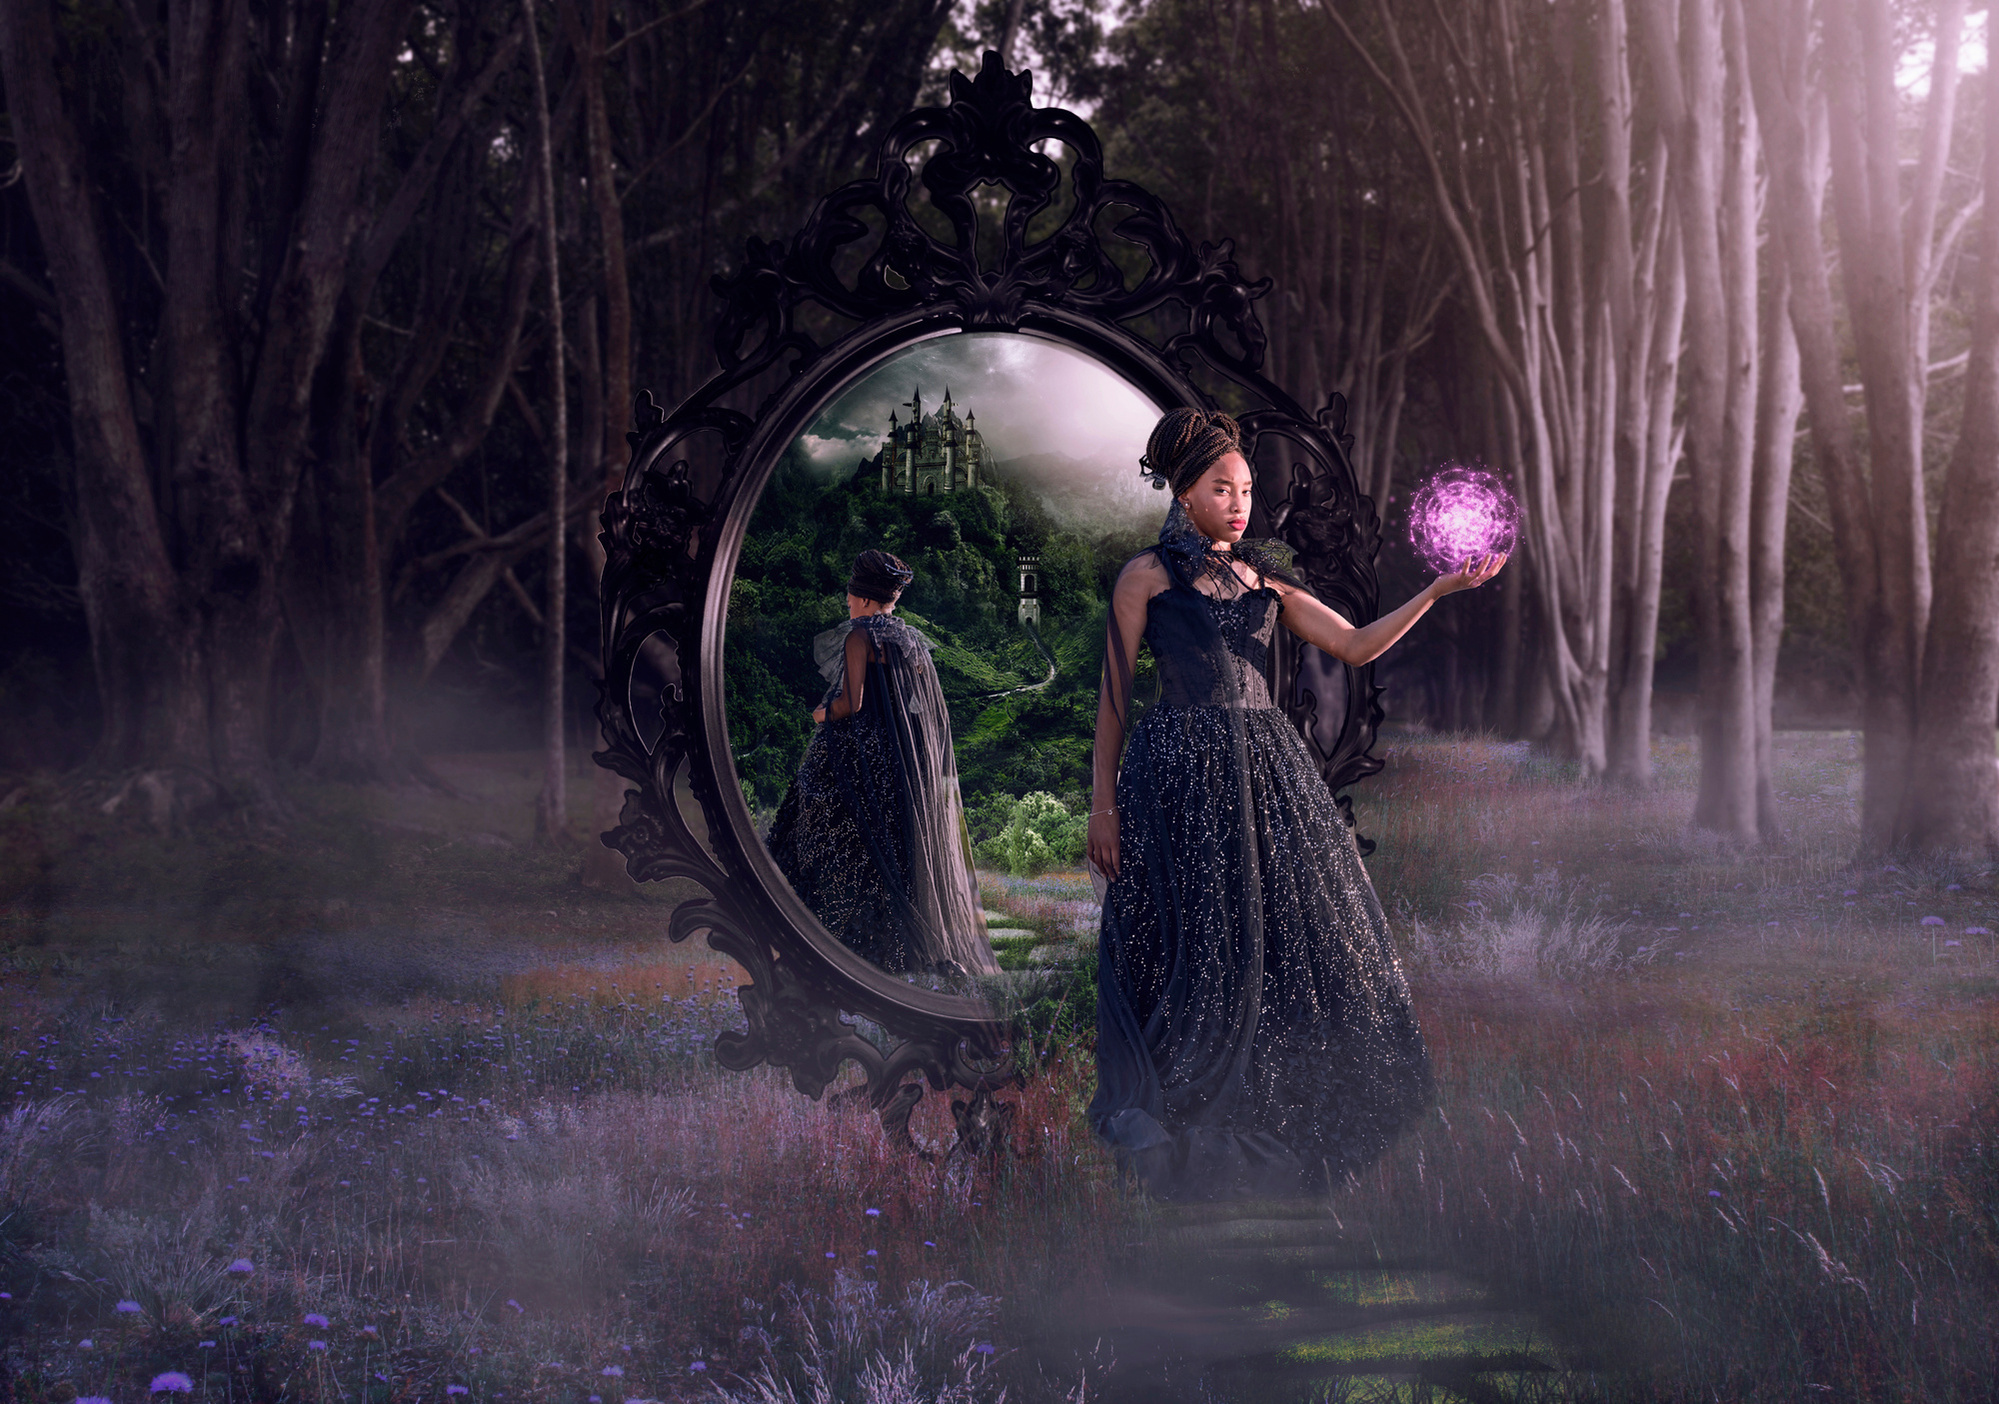 Black girl in a black sparkling gown standing in a forest holding a magical purple orb in front of a mirror, with her reflection walking away toward a castle